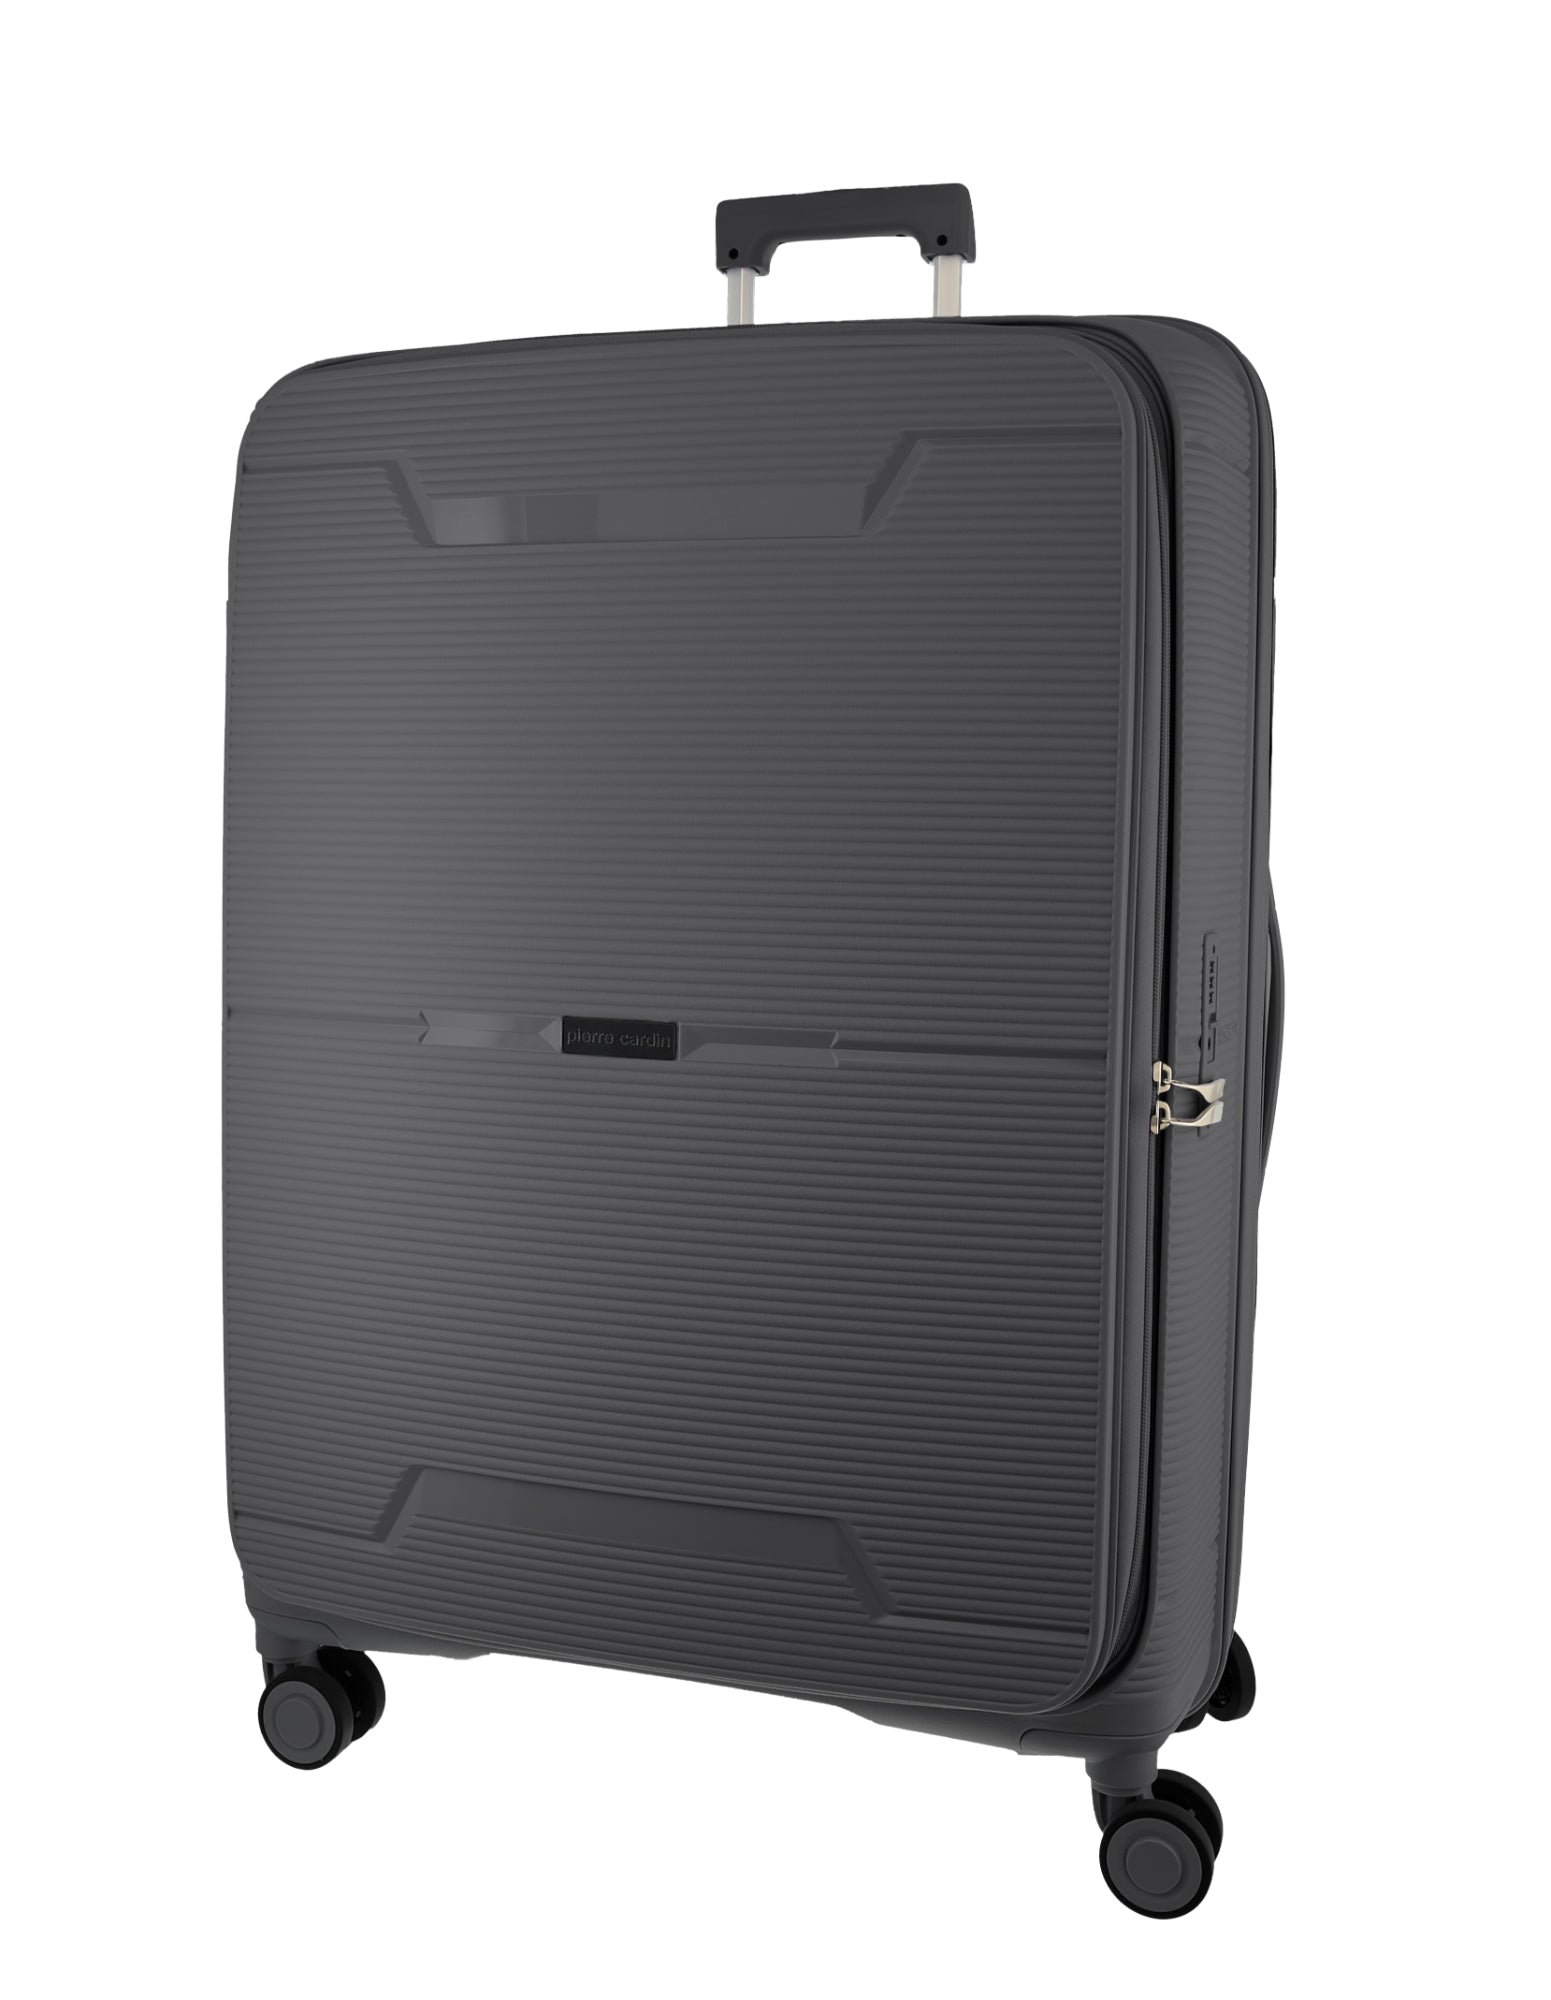 Pierre Cardin 80cm LARGE Hard Shell Suitcase in Graphite